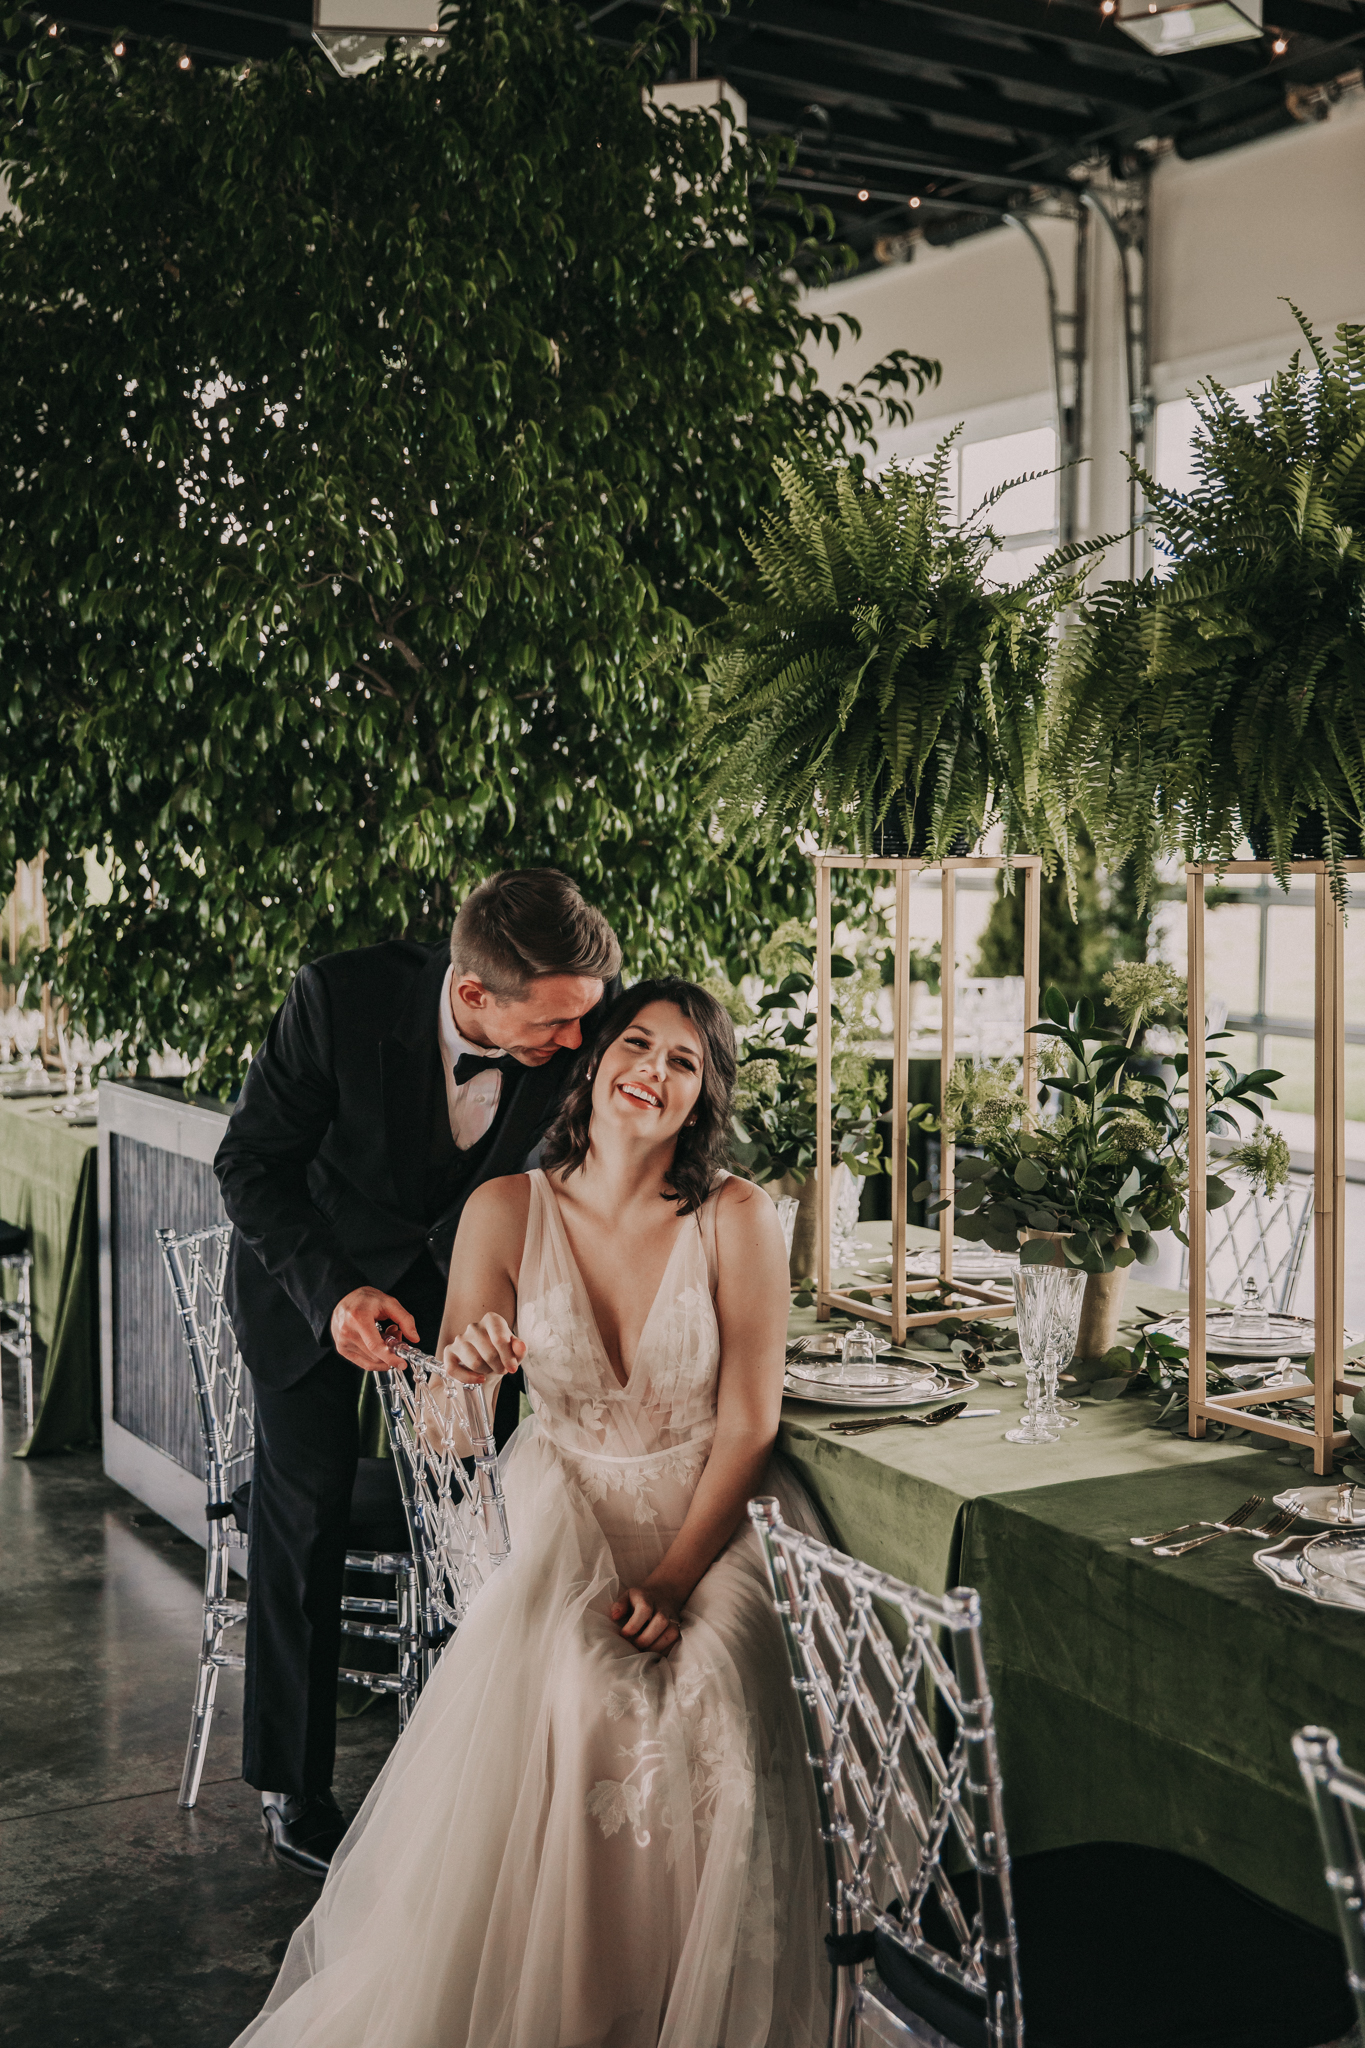 Shades of Green Legacy Styled Shoot by Music City Events and Billie-Shaye Style featured on Nashville Bride Guide